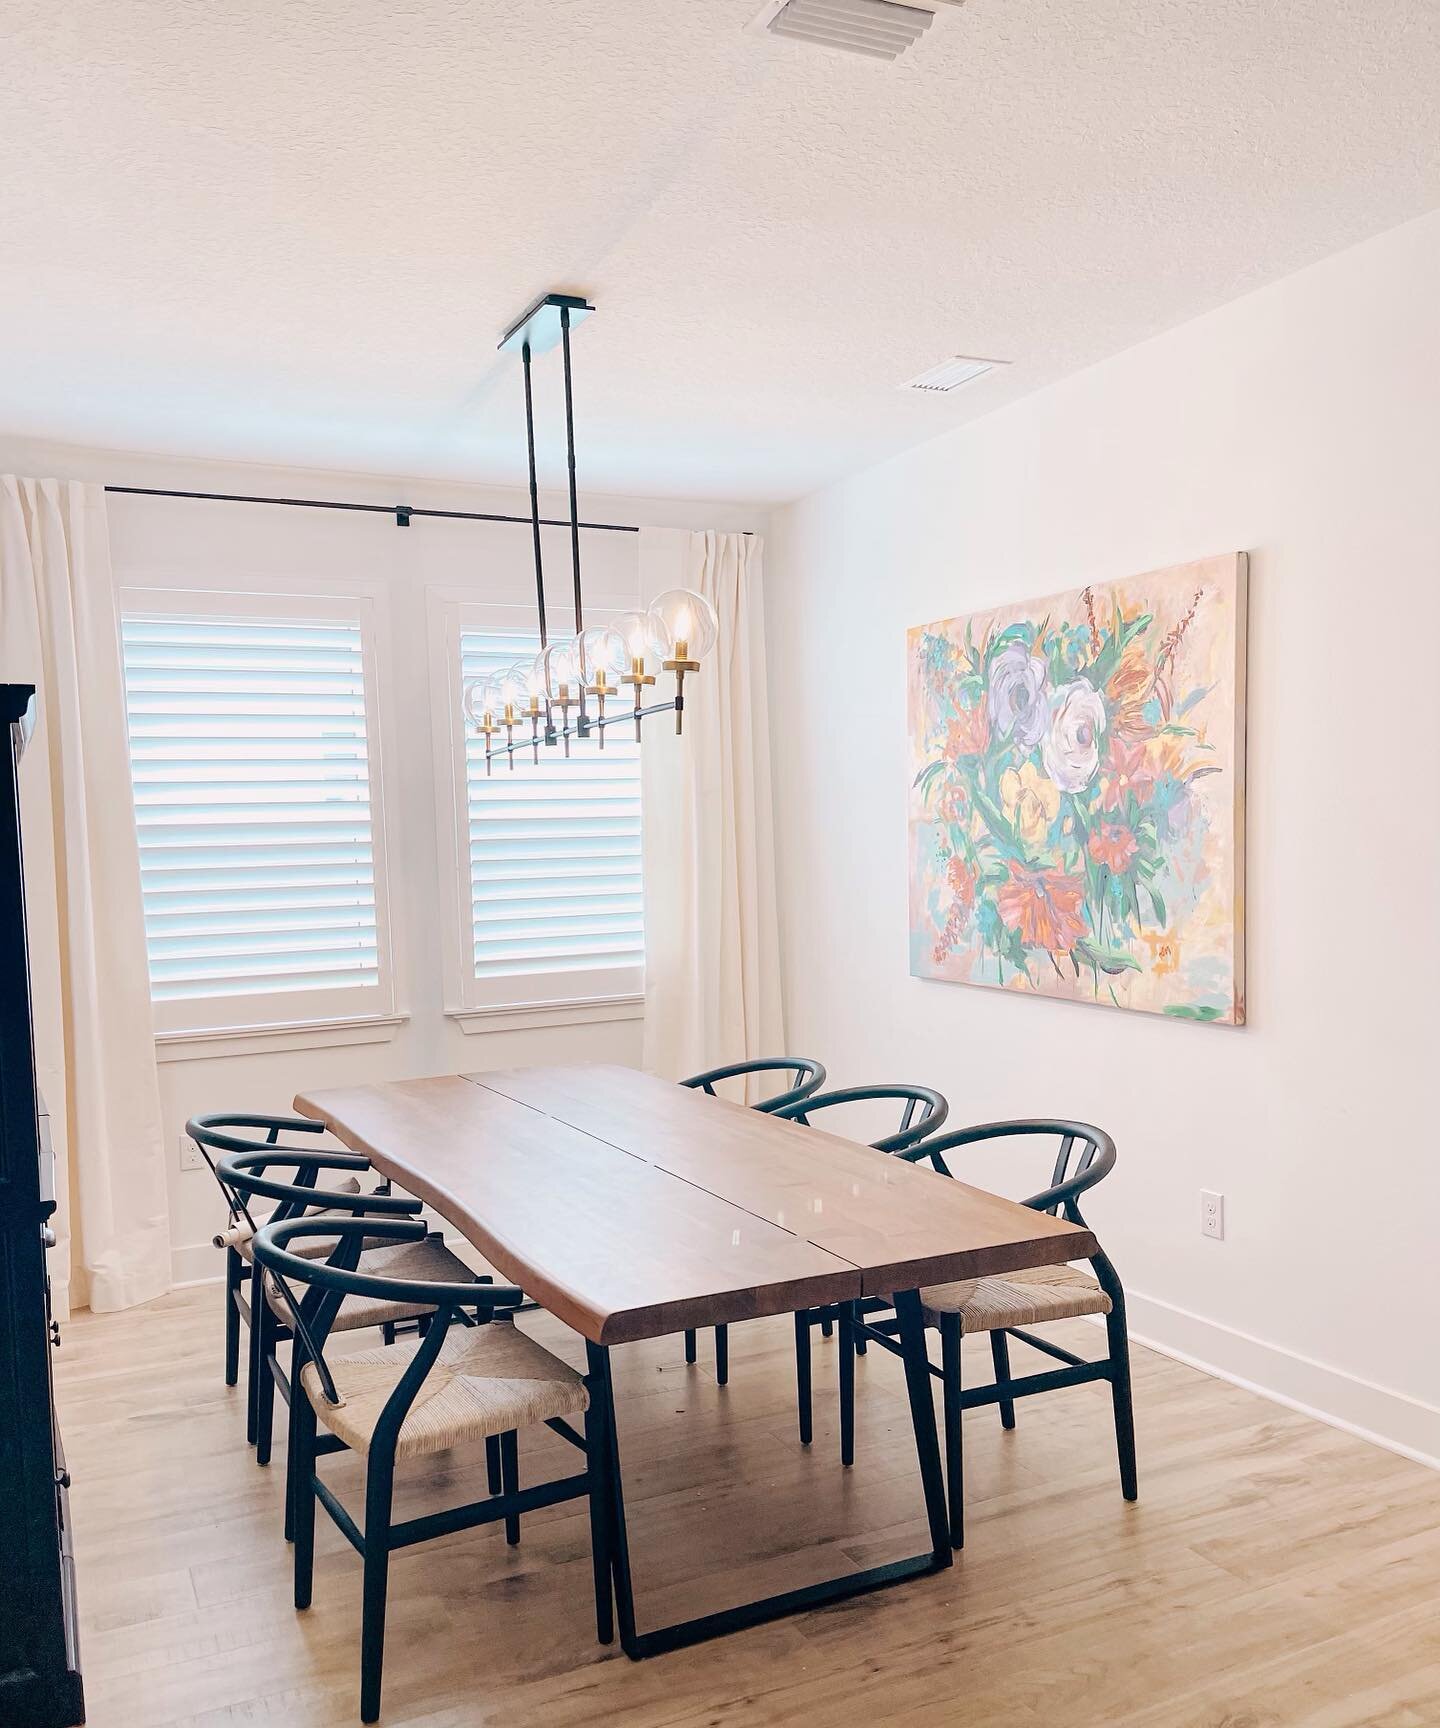 Two beautiful spaces made extra open and airy by using shutters as the window covering of choice. A true balance of form &amp; function. ⚖️ Can&rsquo;t you just picture the perfect Thanksgiving dinner in this dining room?! 🧡

Designed by Therese D.
